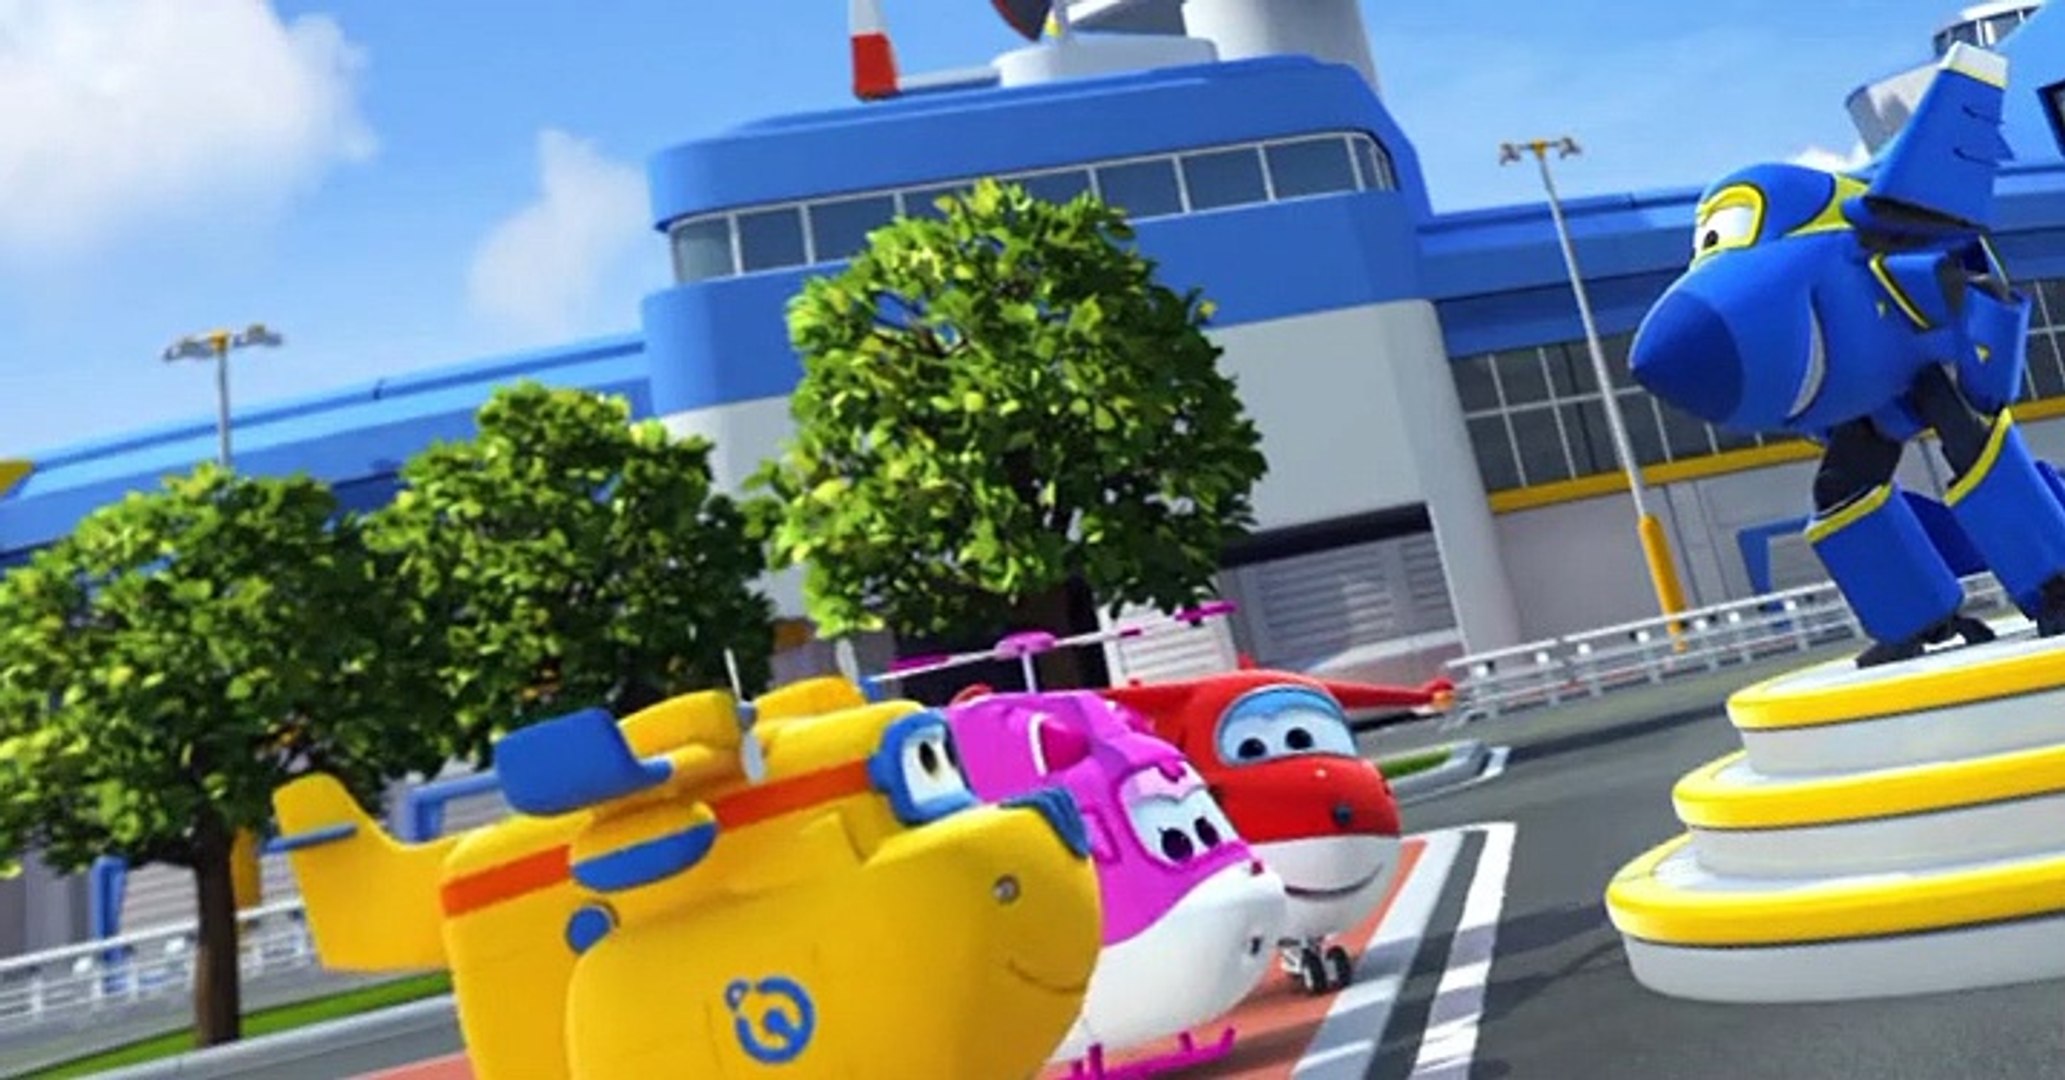 Super Wings! Super Wings! E027 – Fast Track - video Dailymotion